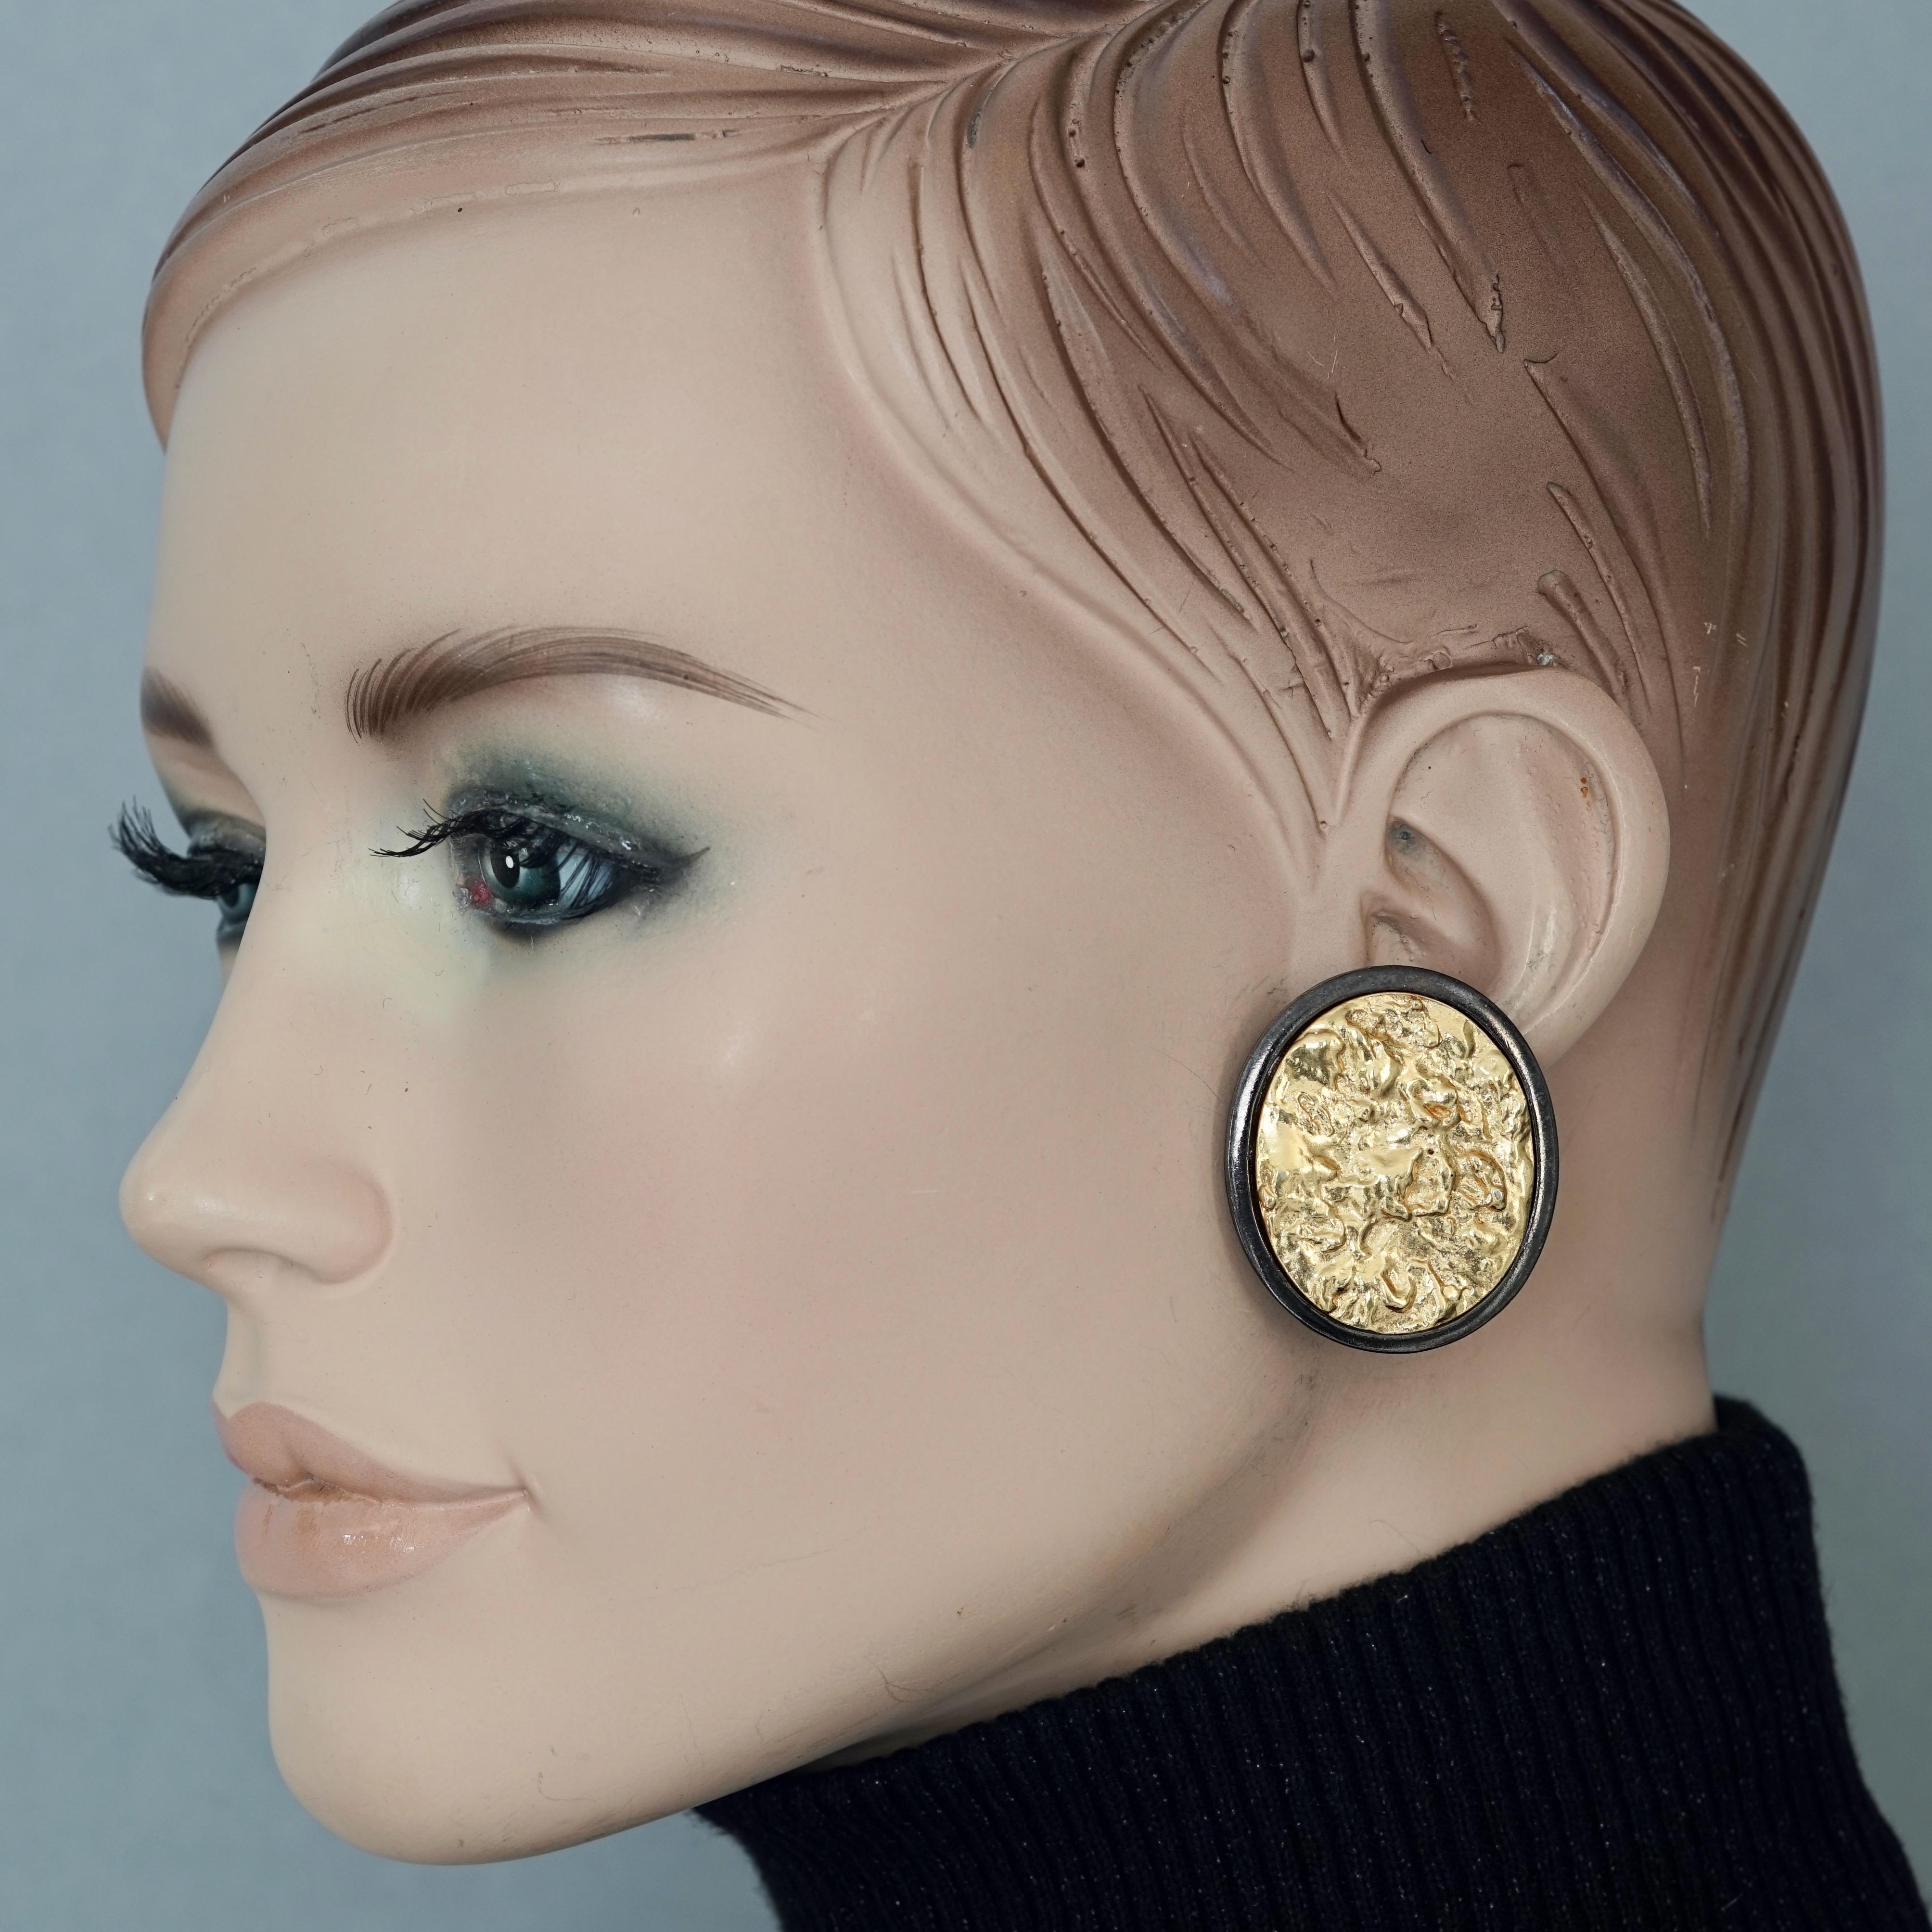 Vintage YVES SAINT LAURENT Ysl Two Tone Textured Oval Disc Earrings

Measurements:
Height: 1.50 inches (3.8 cm)
Width: 1.25 inches (3.2 cm)
Weight per Earring: 18 grams

Features:
- 100% Authentic YVES SAINT LAURENT.
- Two tone oval disc earrings